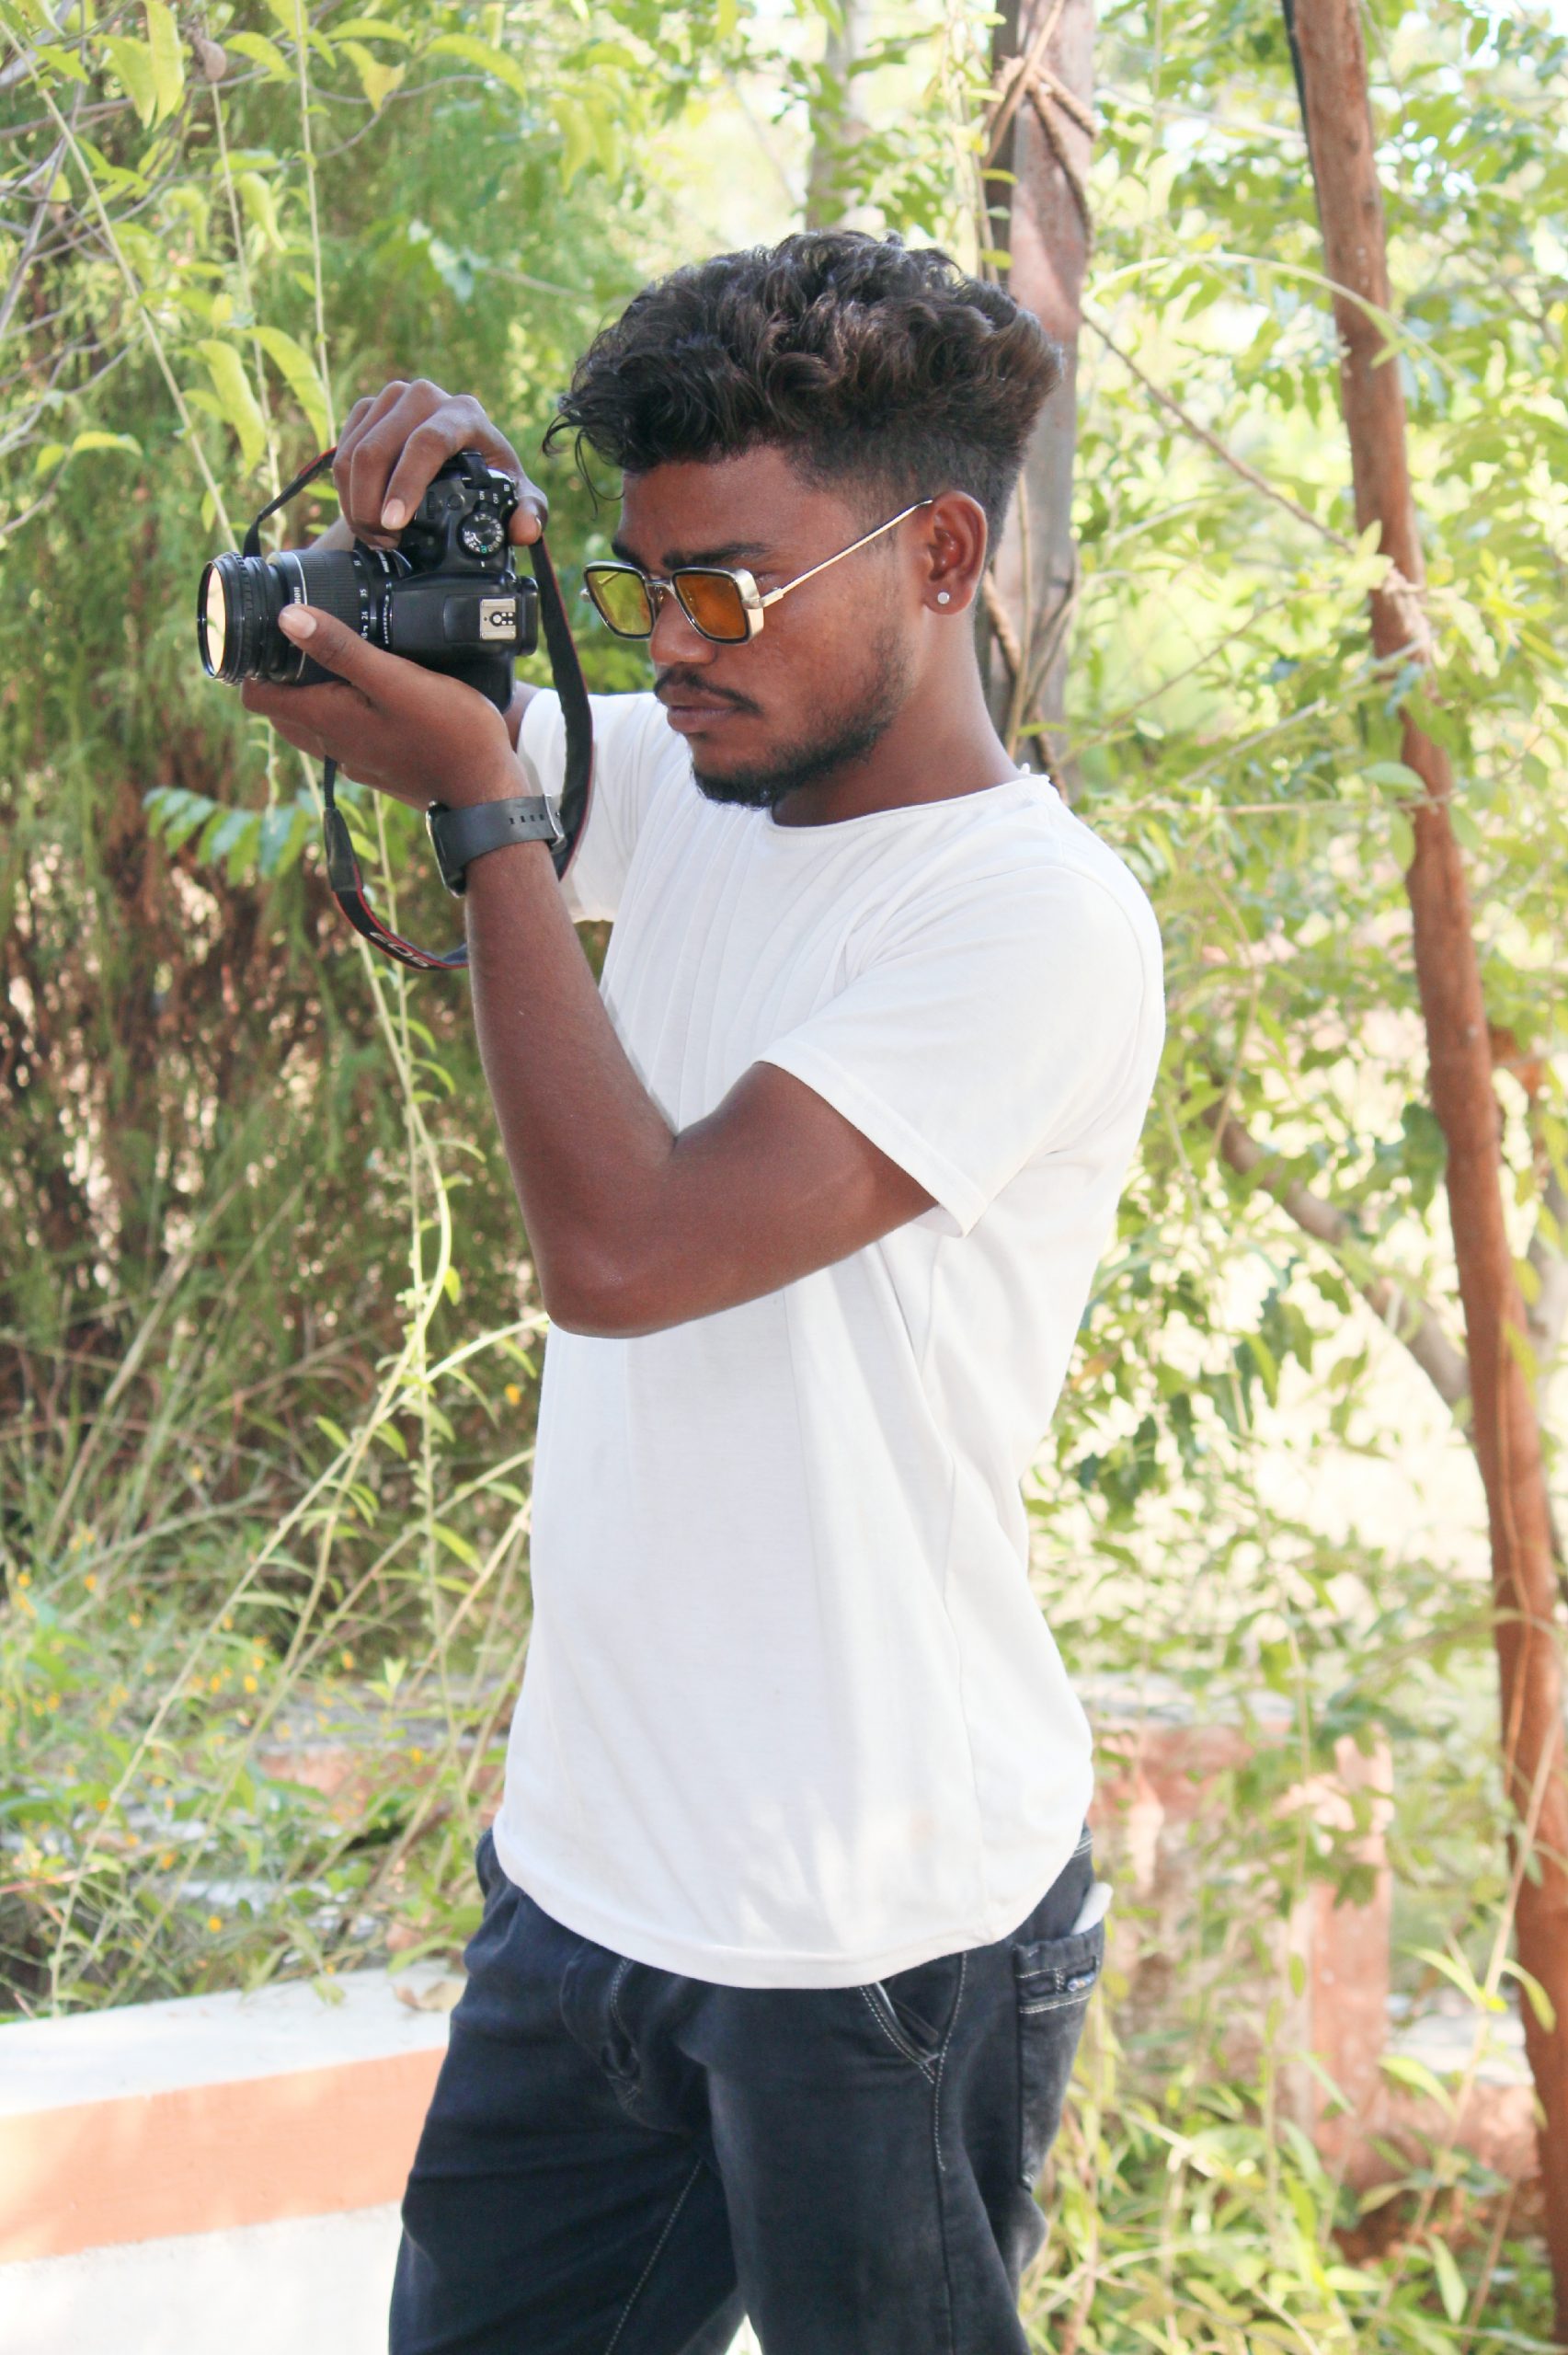 Boy clicking picture with camera